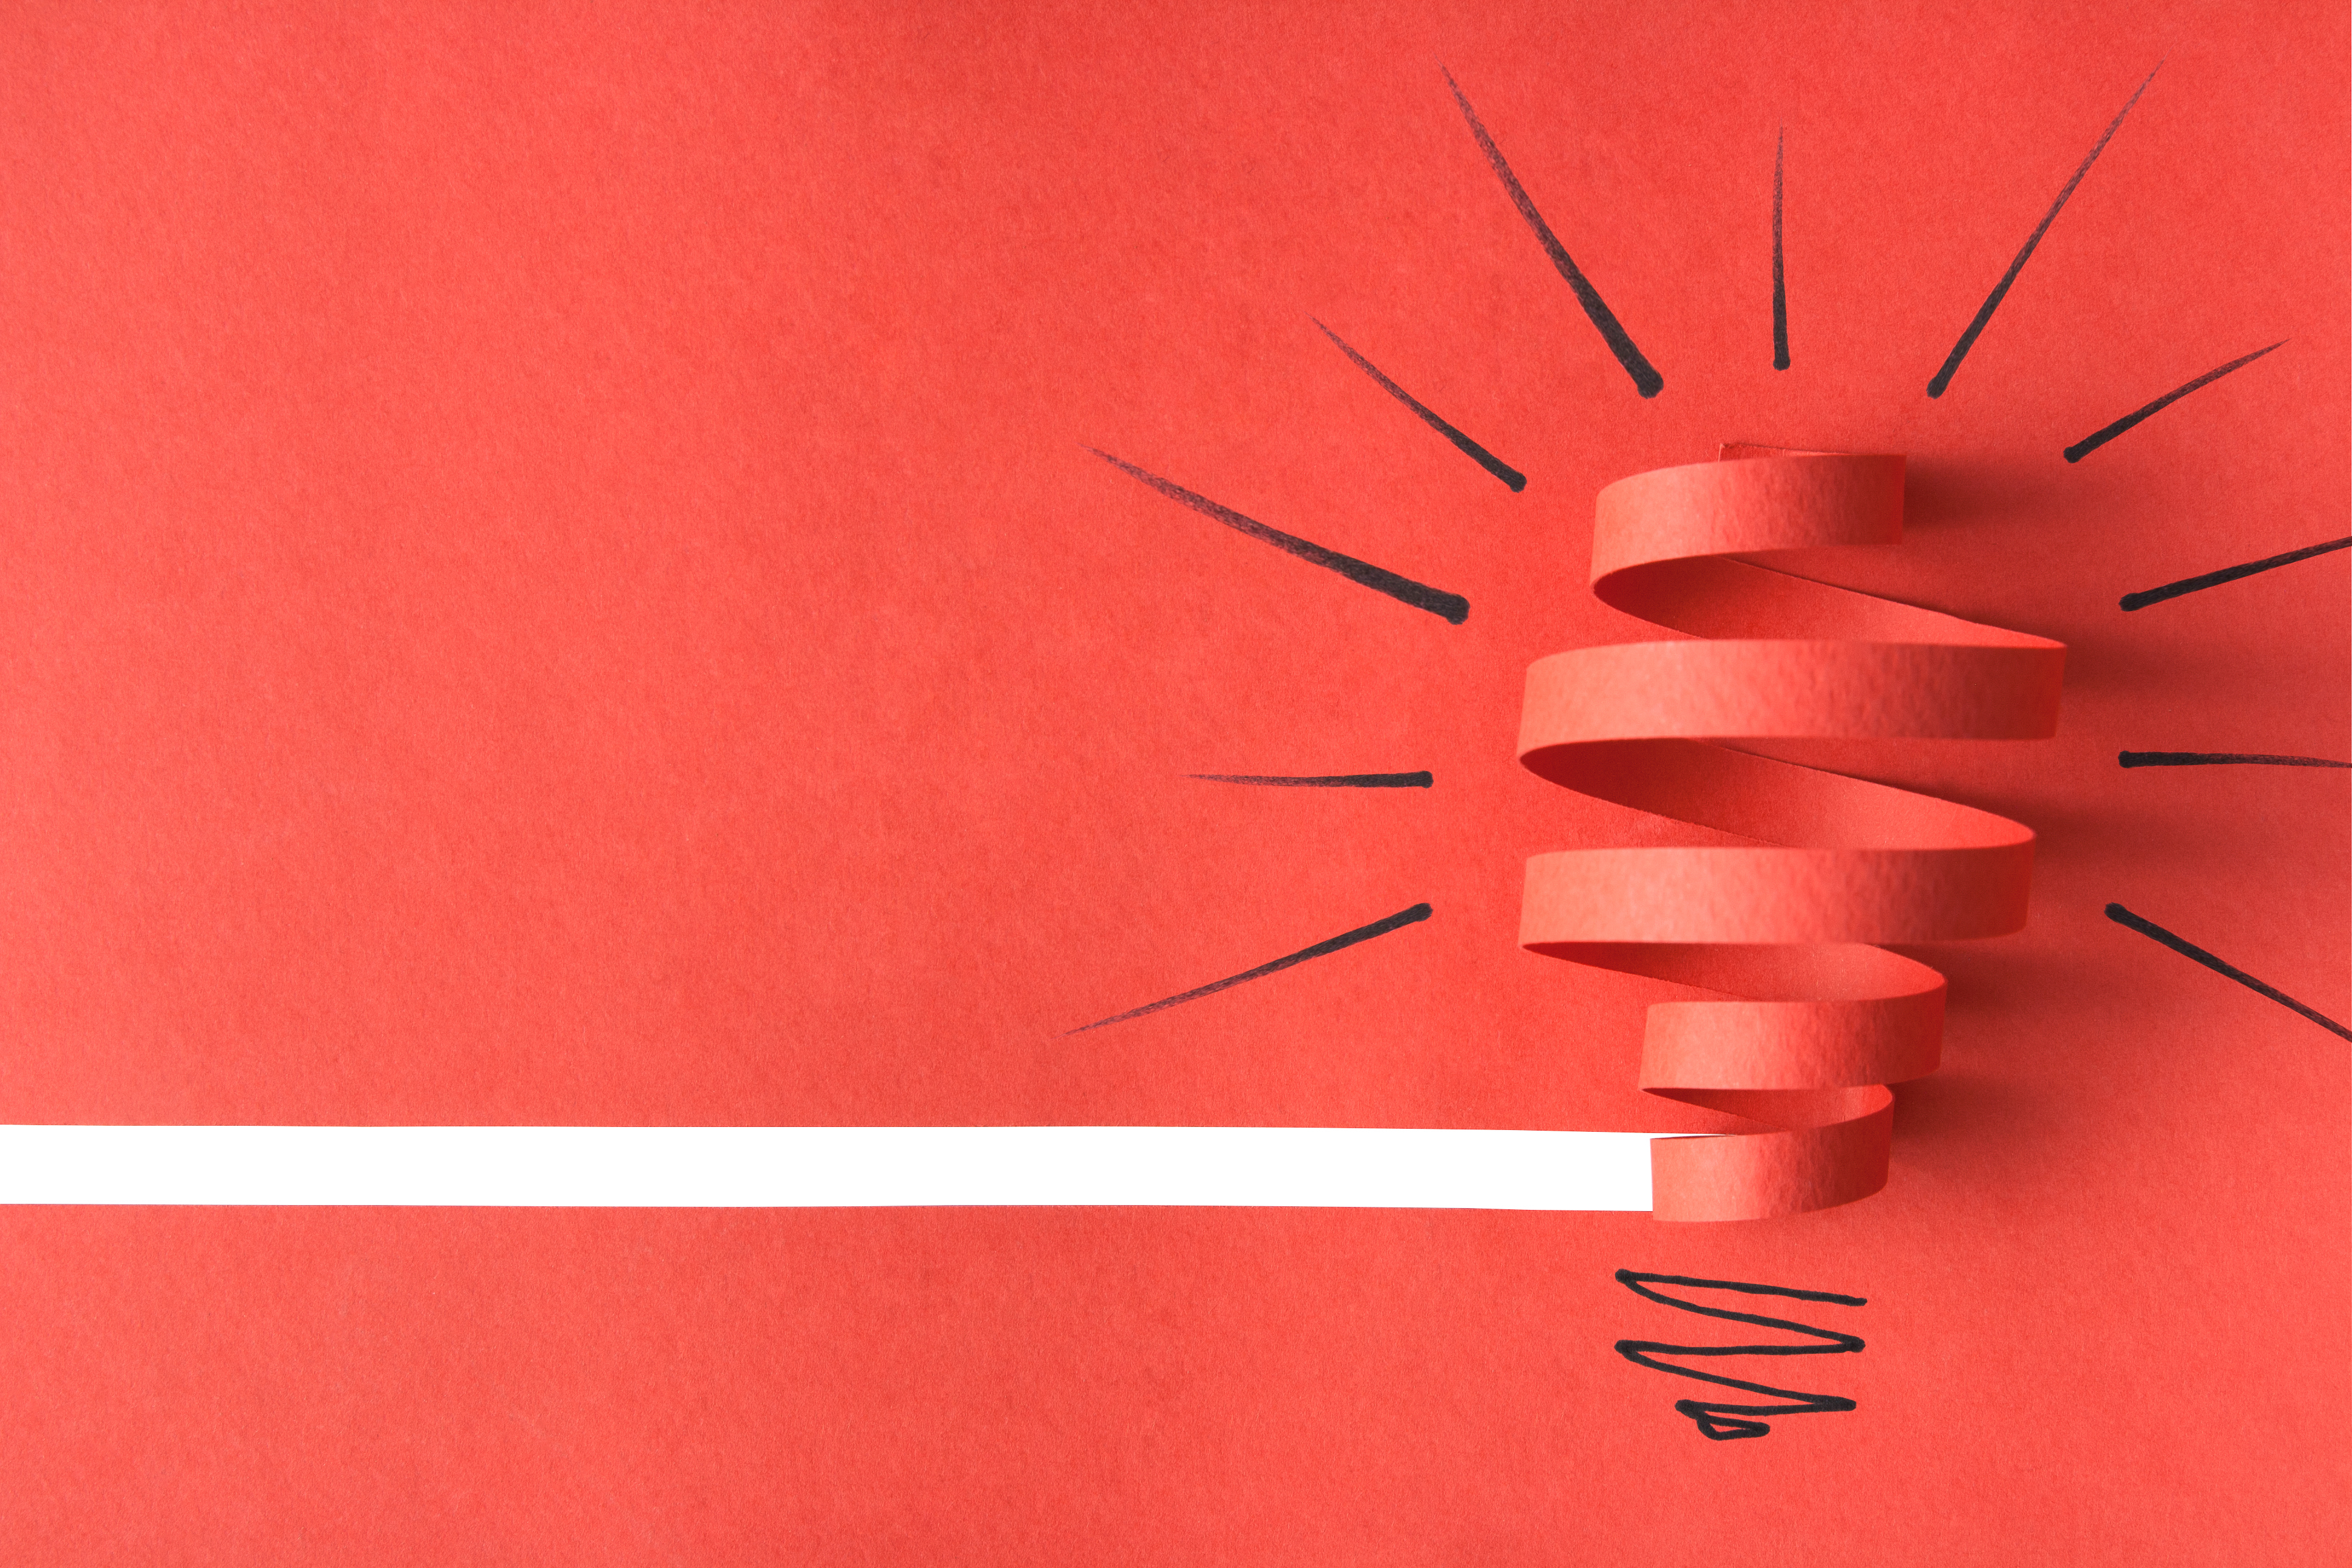 Image of a light bulb cut from red paper on a red background.